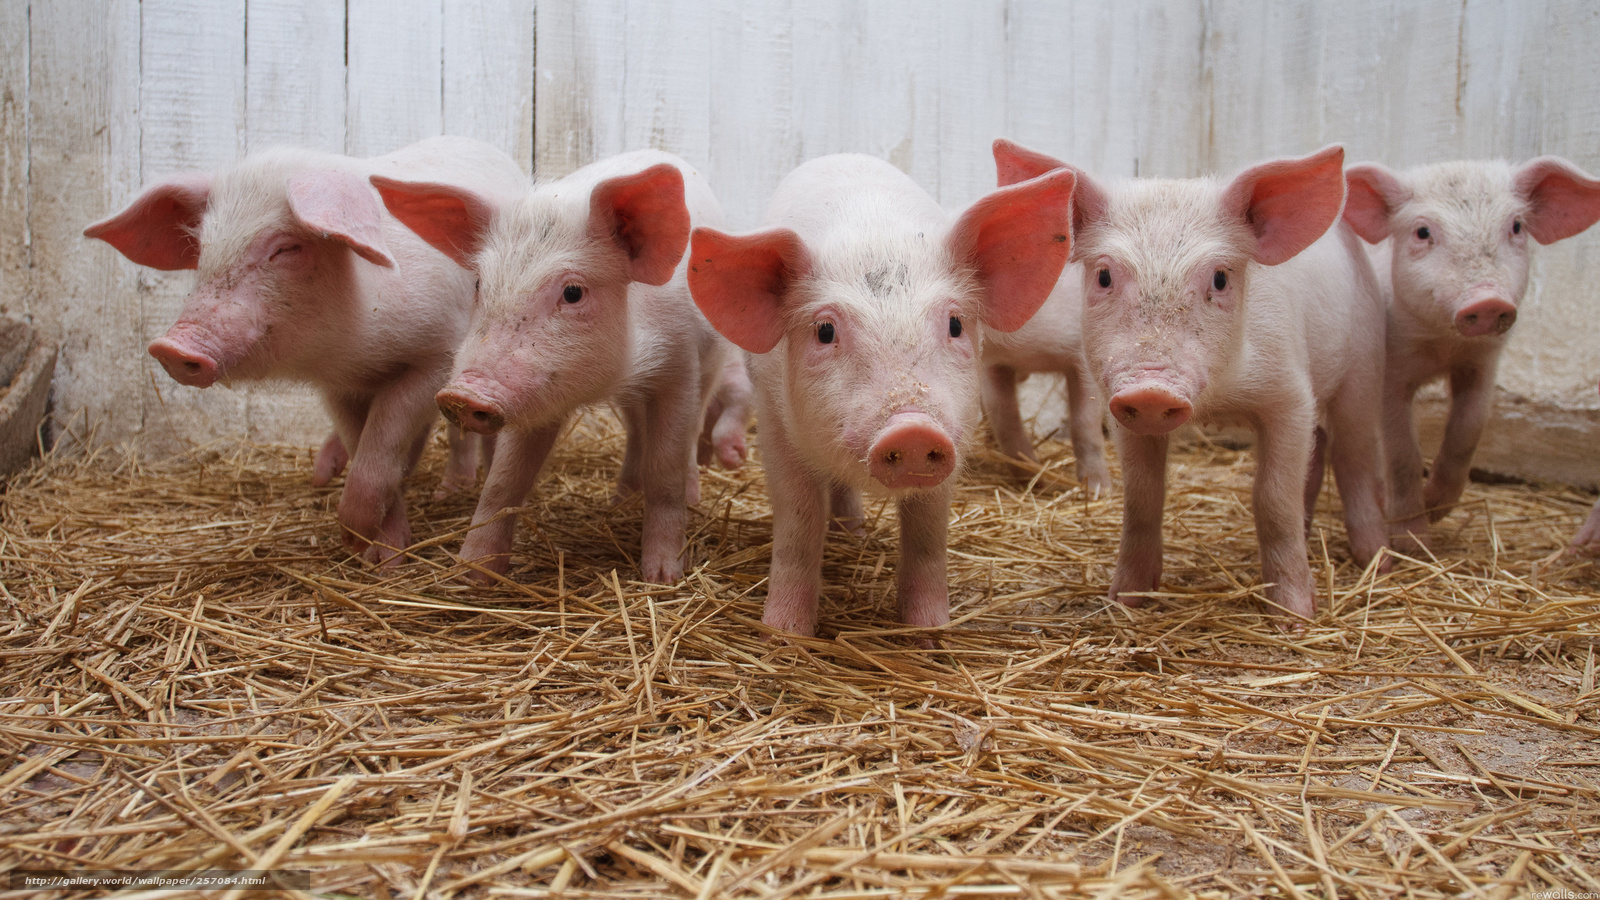 Download wallpaper company pig stable free desktop wallpaper in the